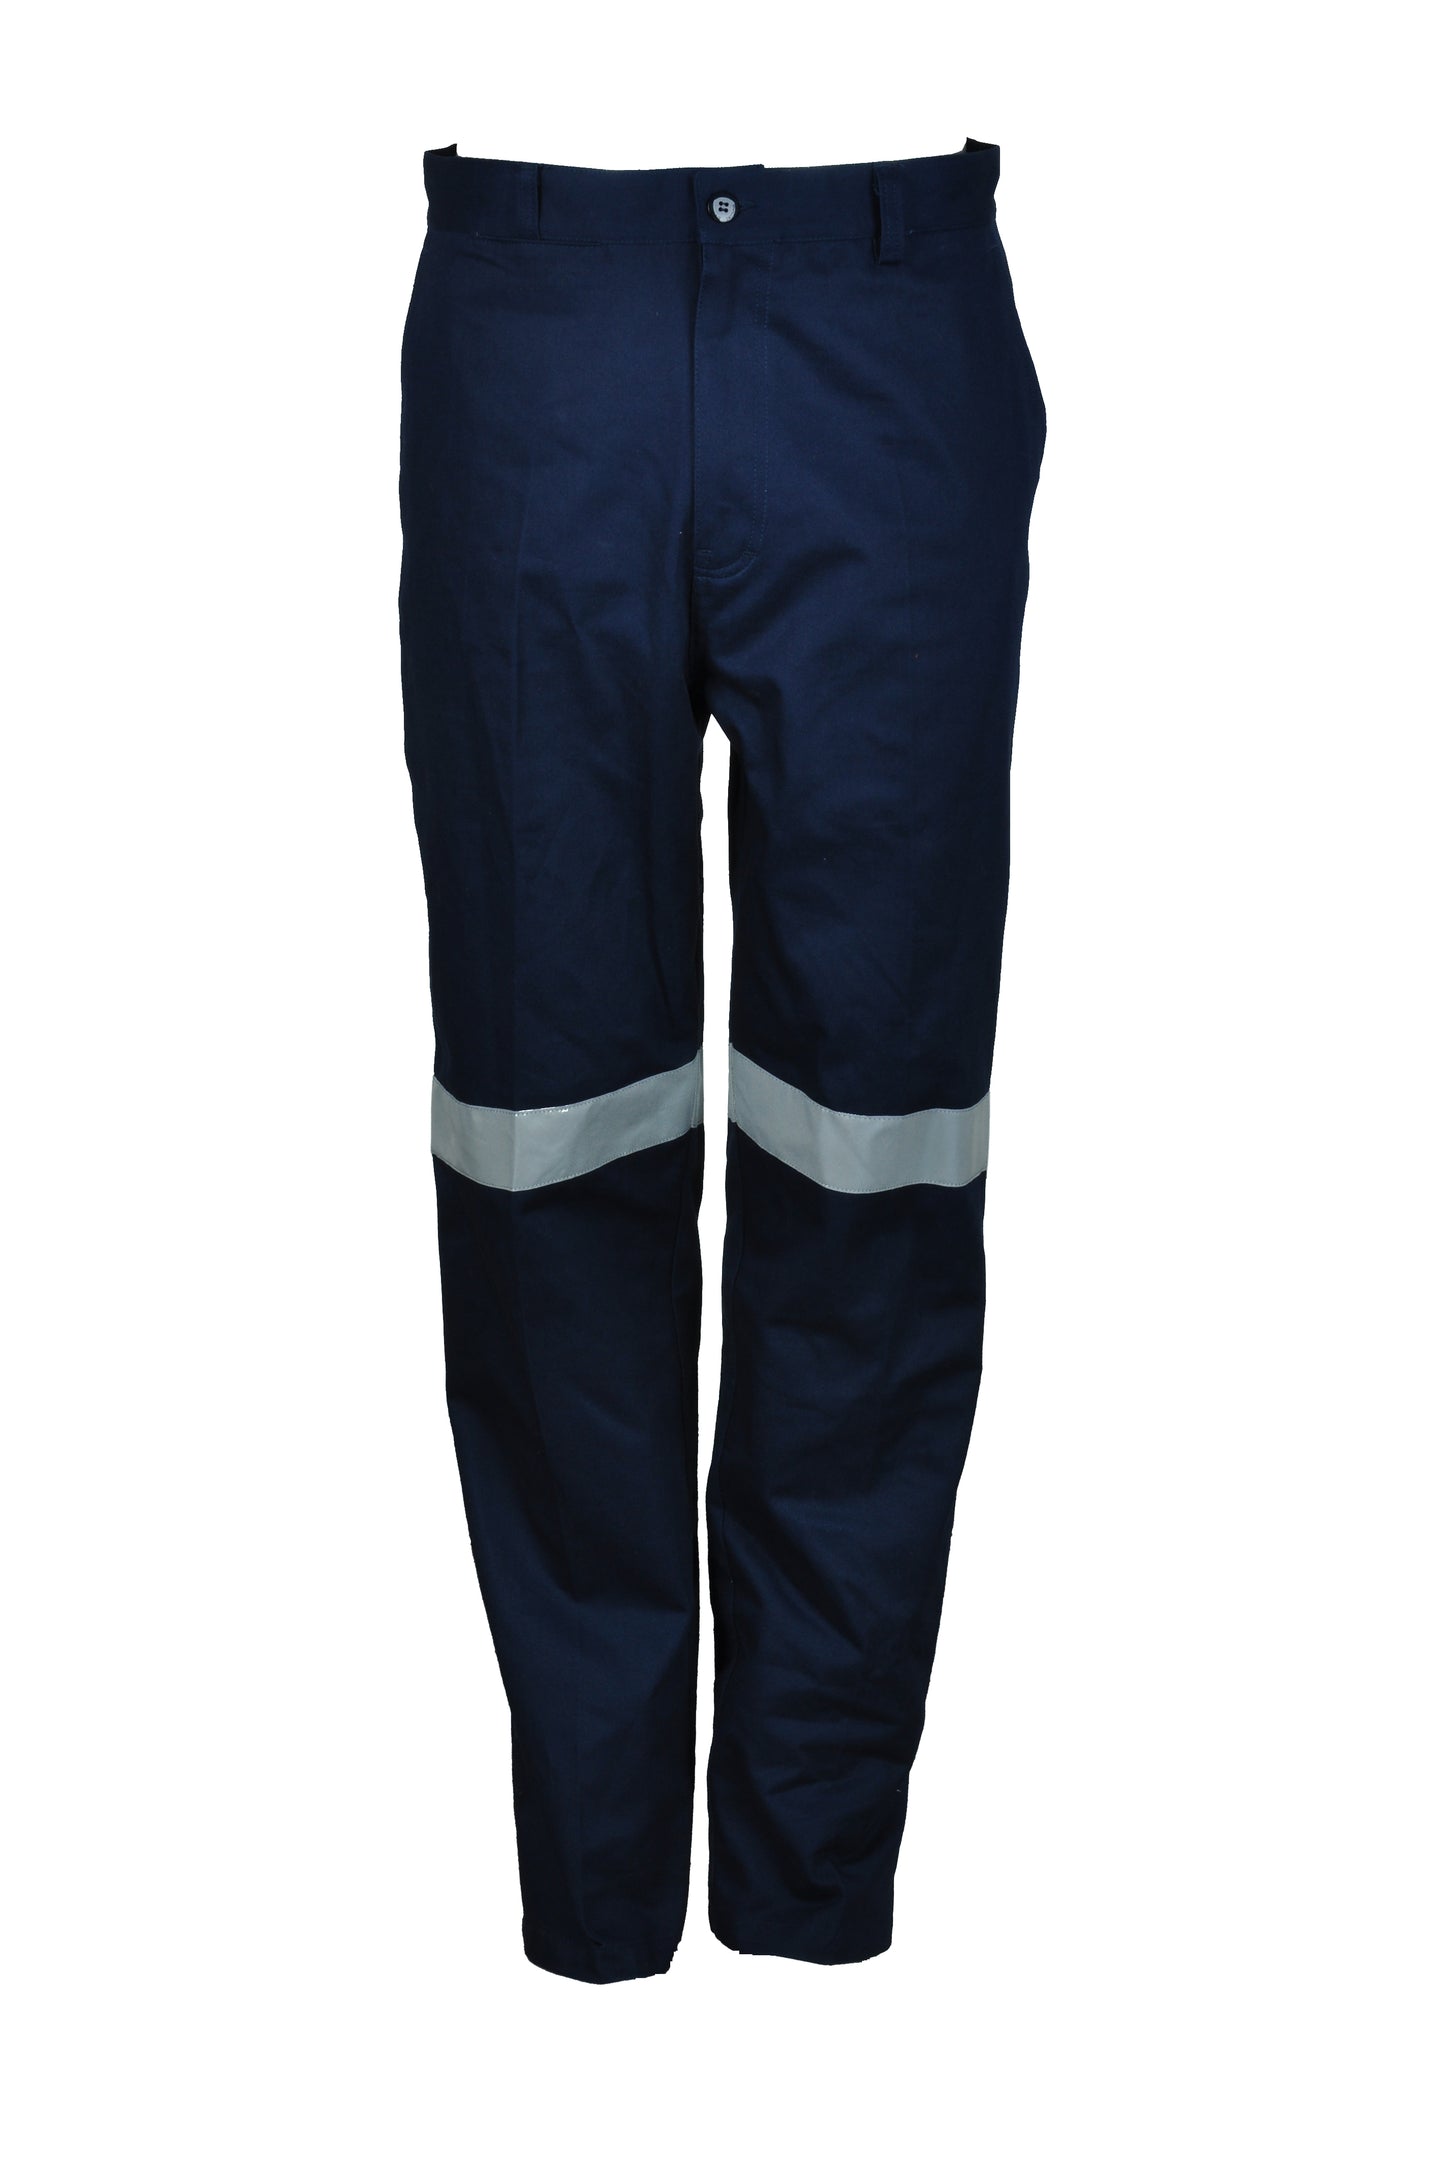 Bocini-Unisex Adults Cotton Drill Work Pants With Reflective Tape-WK1234